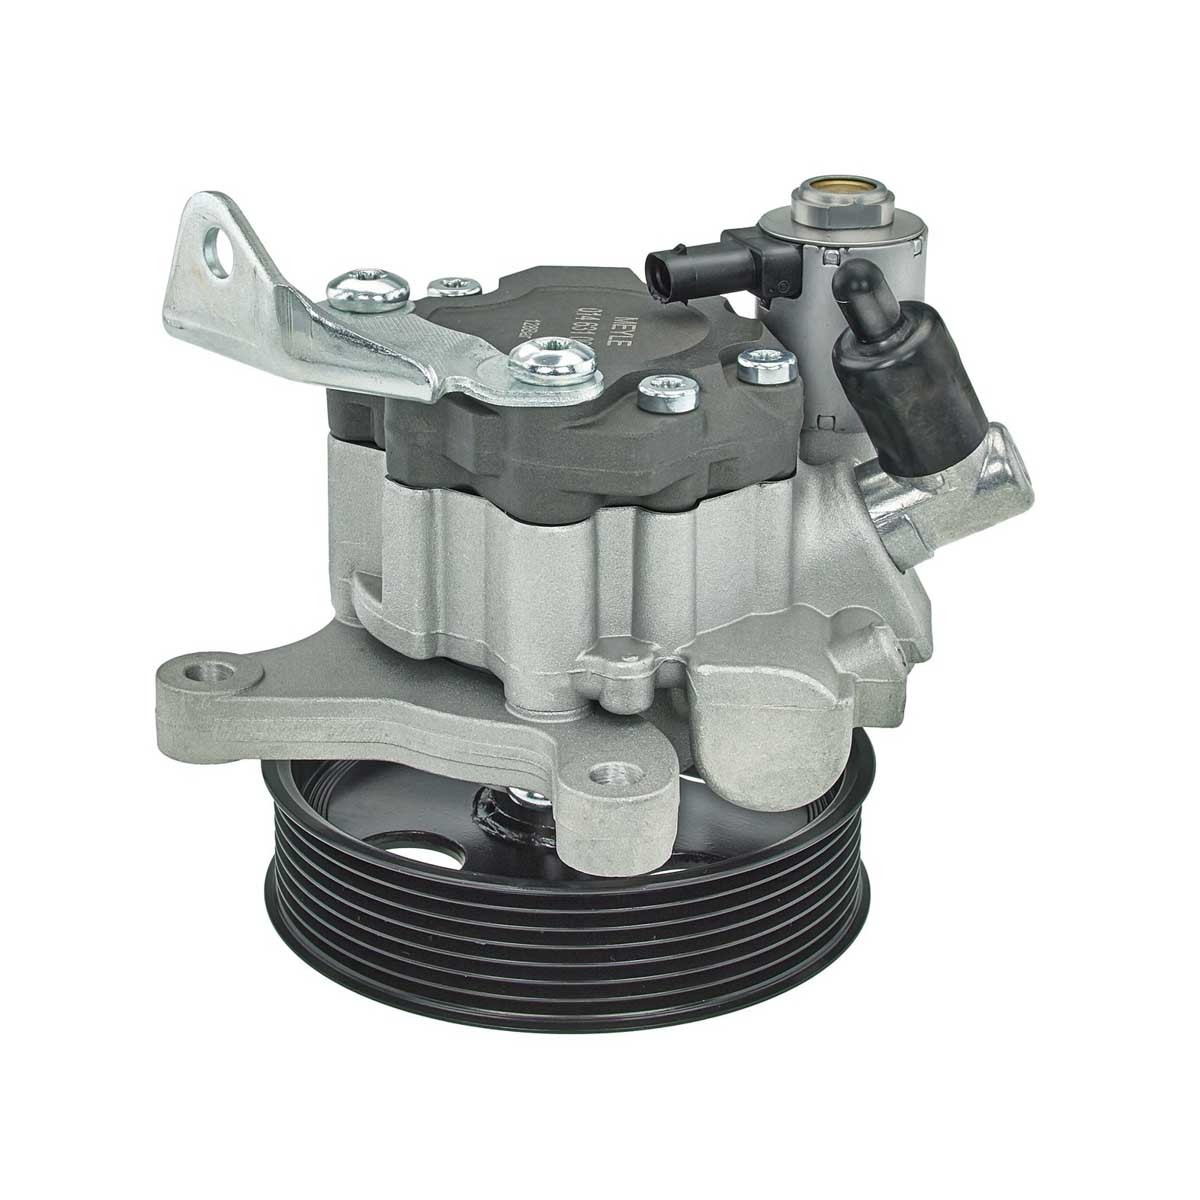 MEYLE Hydraulic steering pump 014 631 0034 suitable for MERCEDES-BENZ C-Class, E-Class